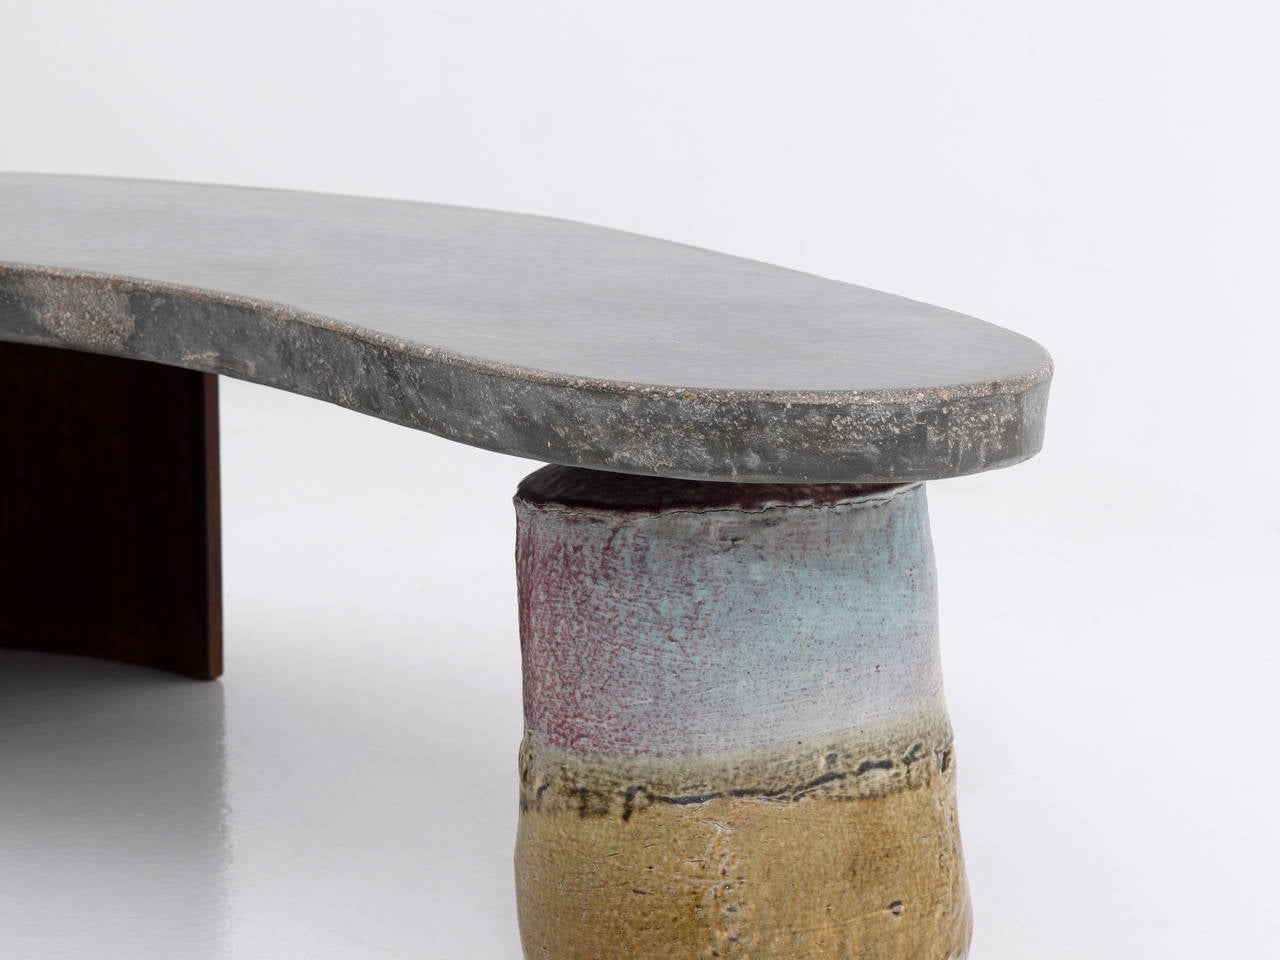 Organic Lined Concrete Bench by Lee Hun Chung, 2012 For Sale 1